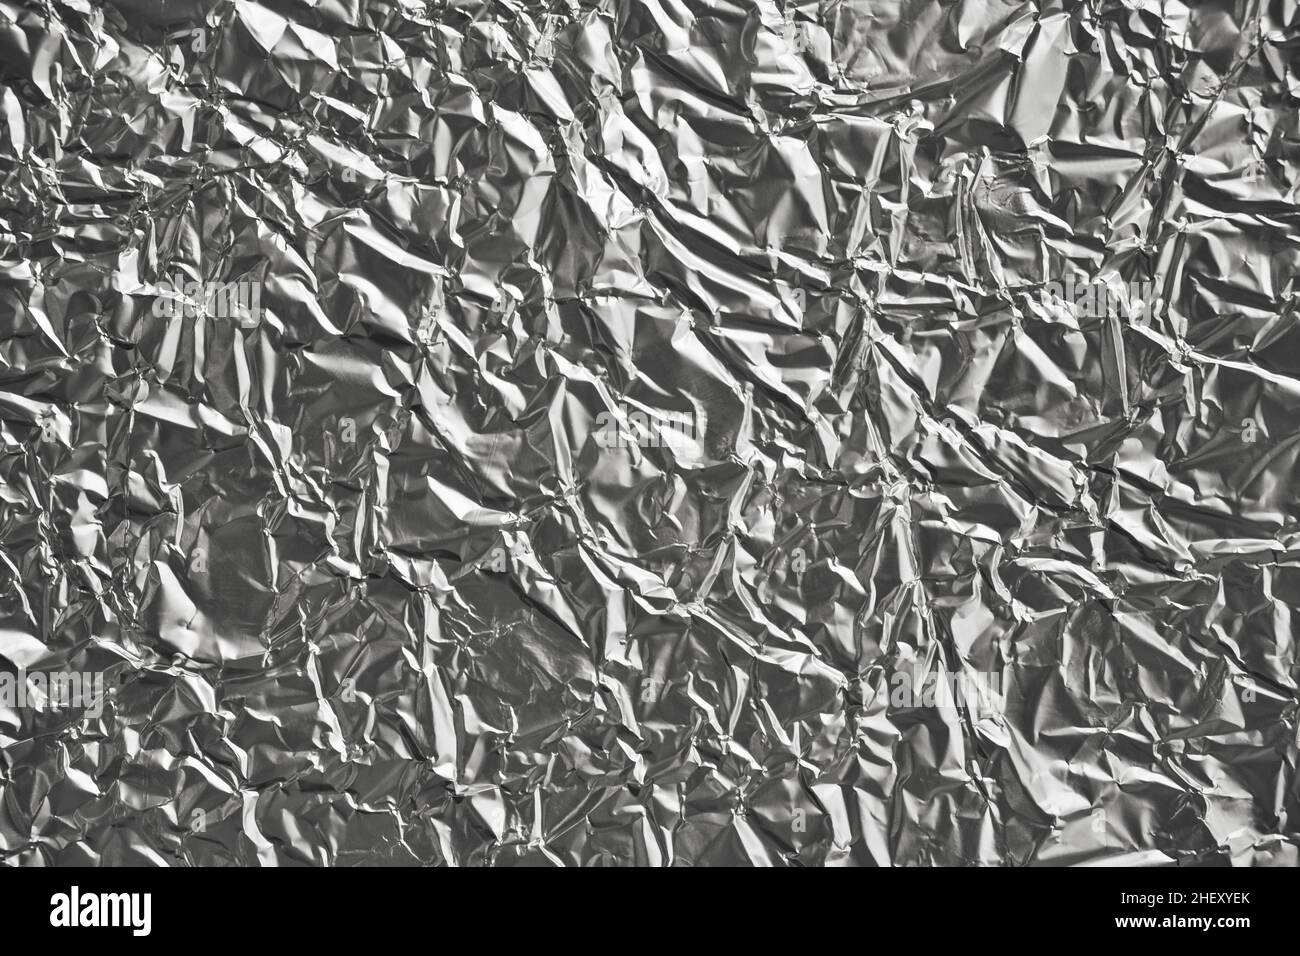 Close-up of crumpled silver aluminum foil texture. Abstract background for design. Stock Photo